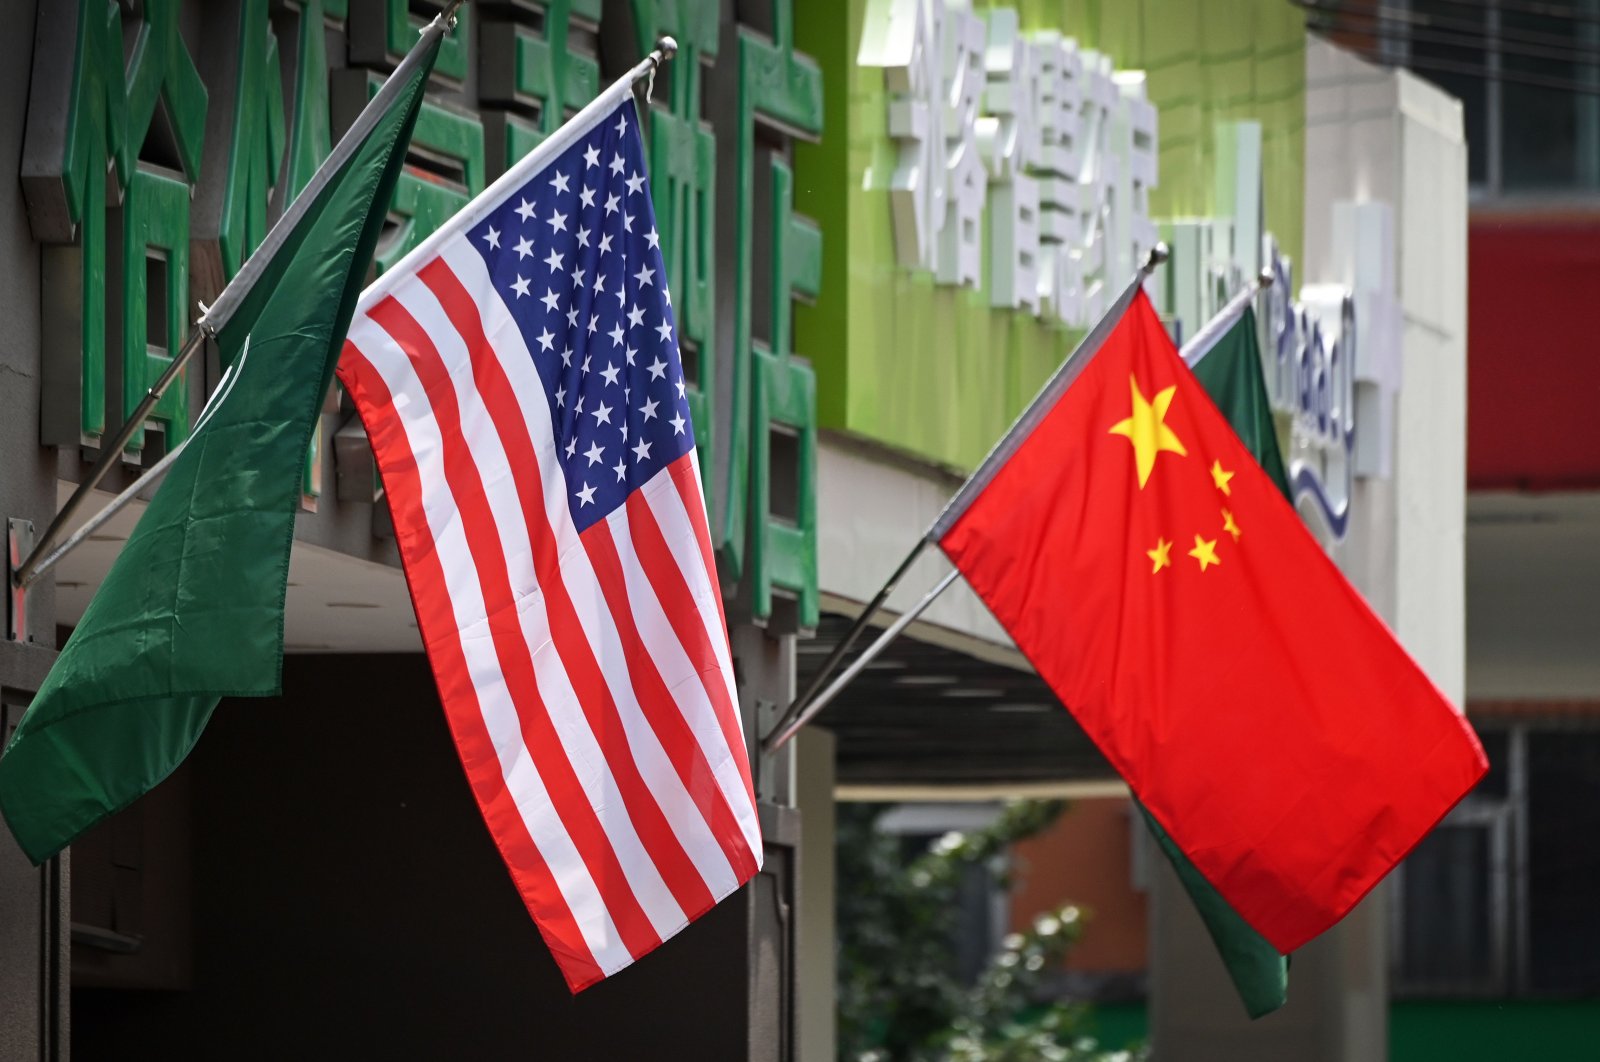 U.S. and Chinese flags displayed outside a hotel in Beijing, China, May 14, 2019. (AFP Photo)